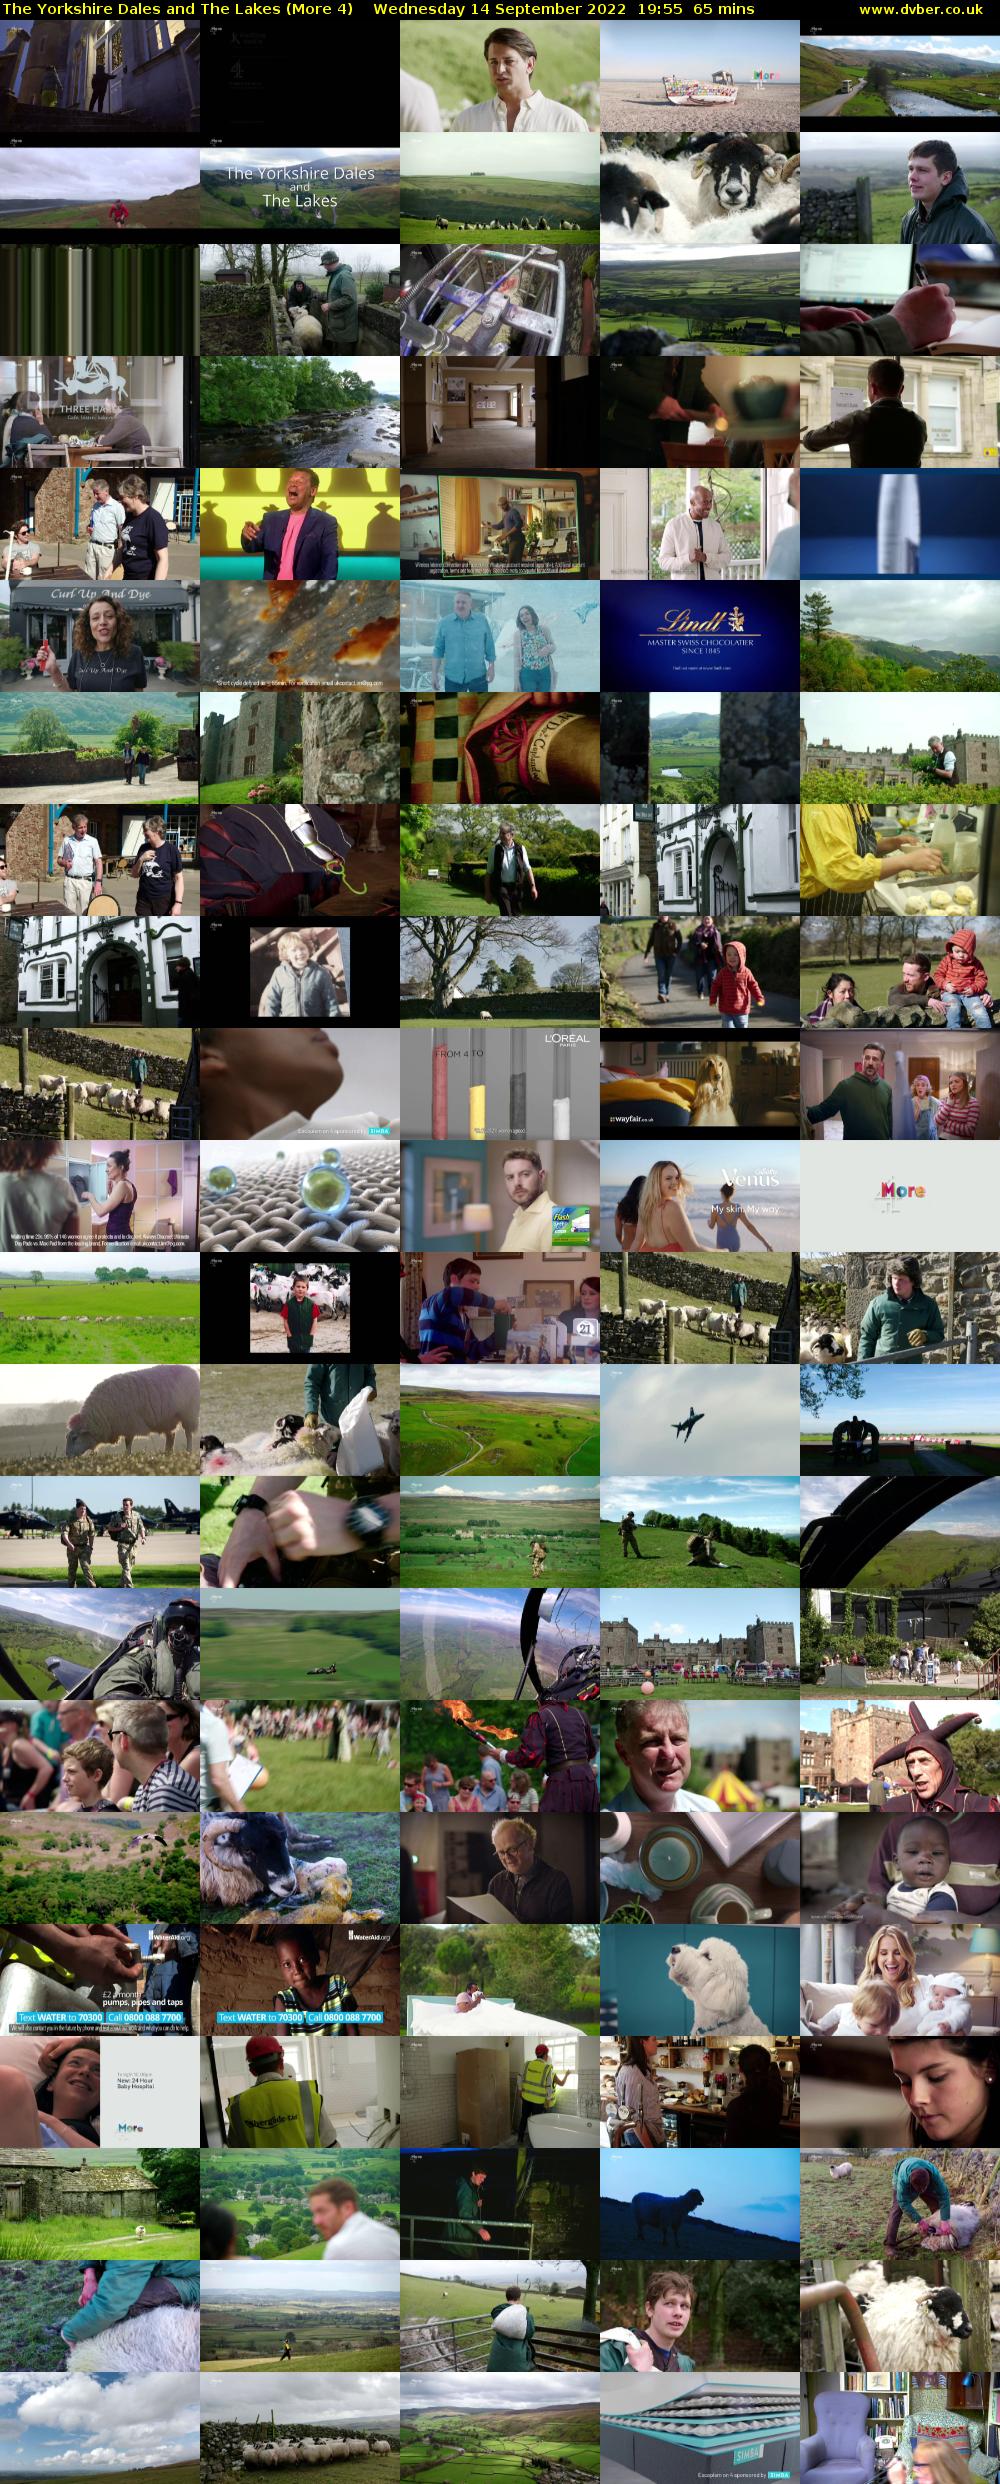 The Yorkshire Dales and The Lakes (More 4) Wednesday 14 September 2022 19:55 - 21:00